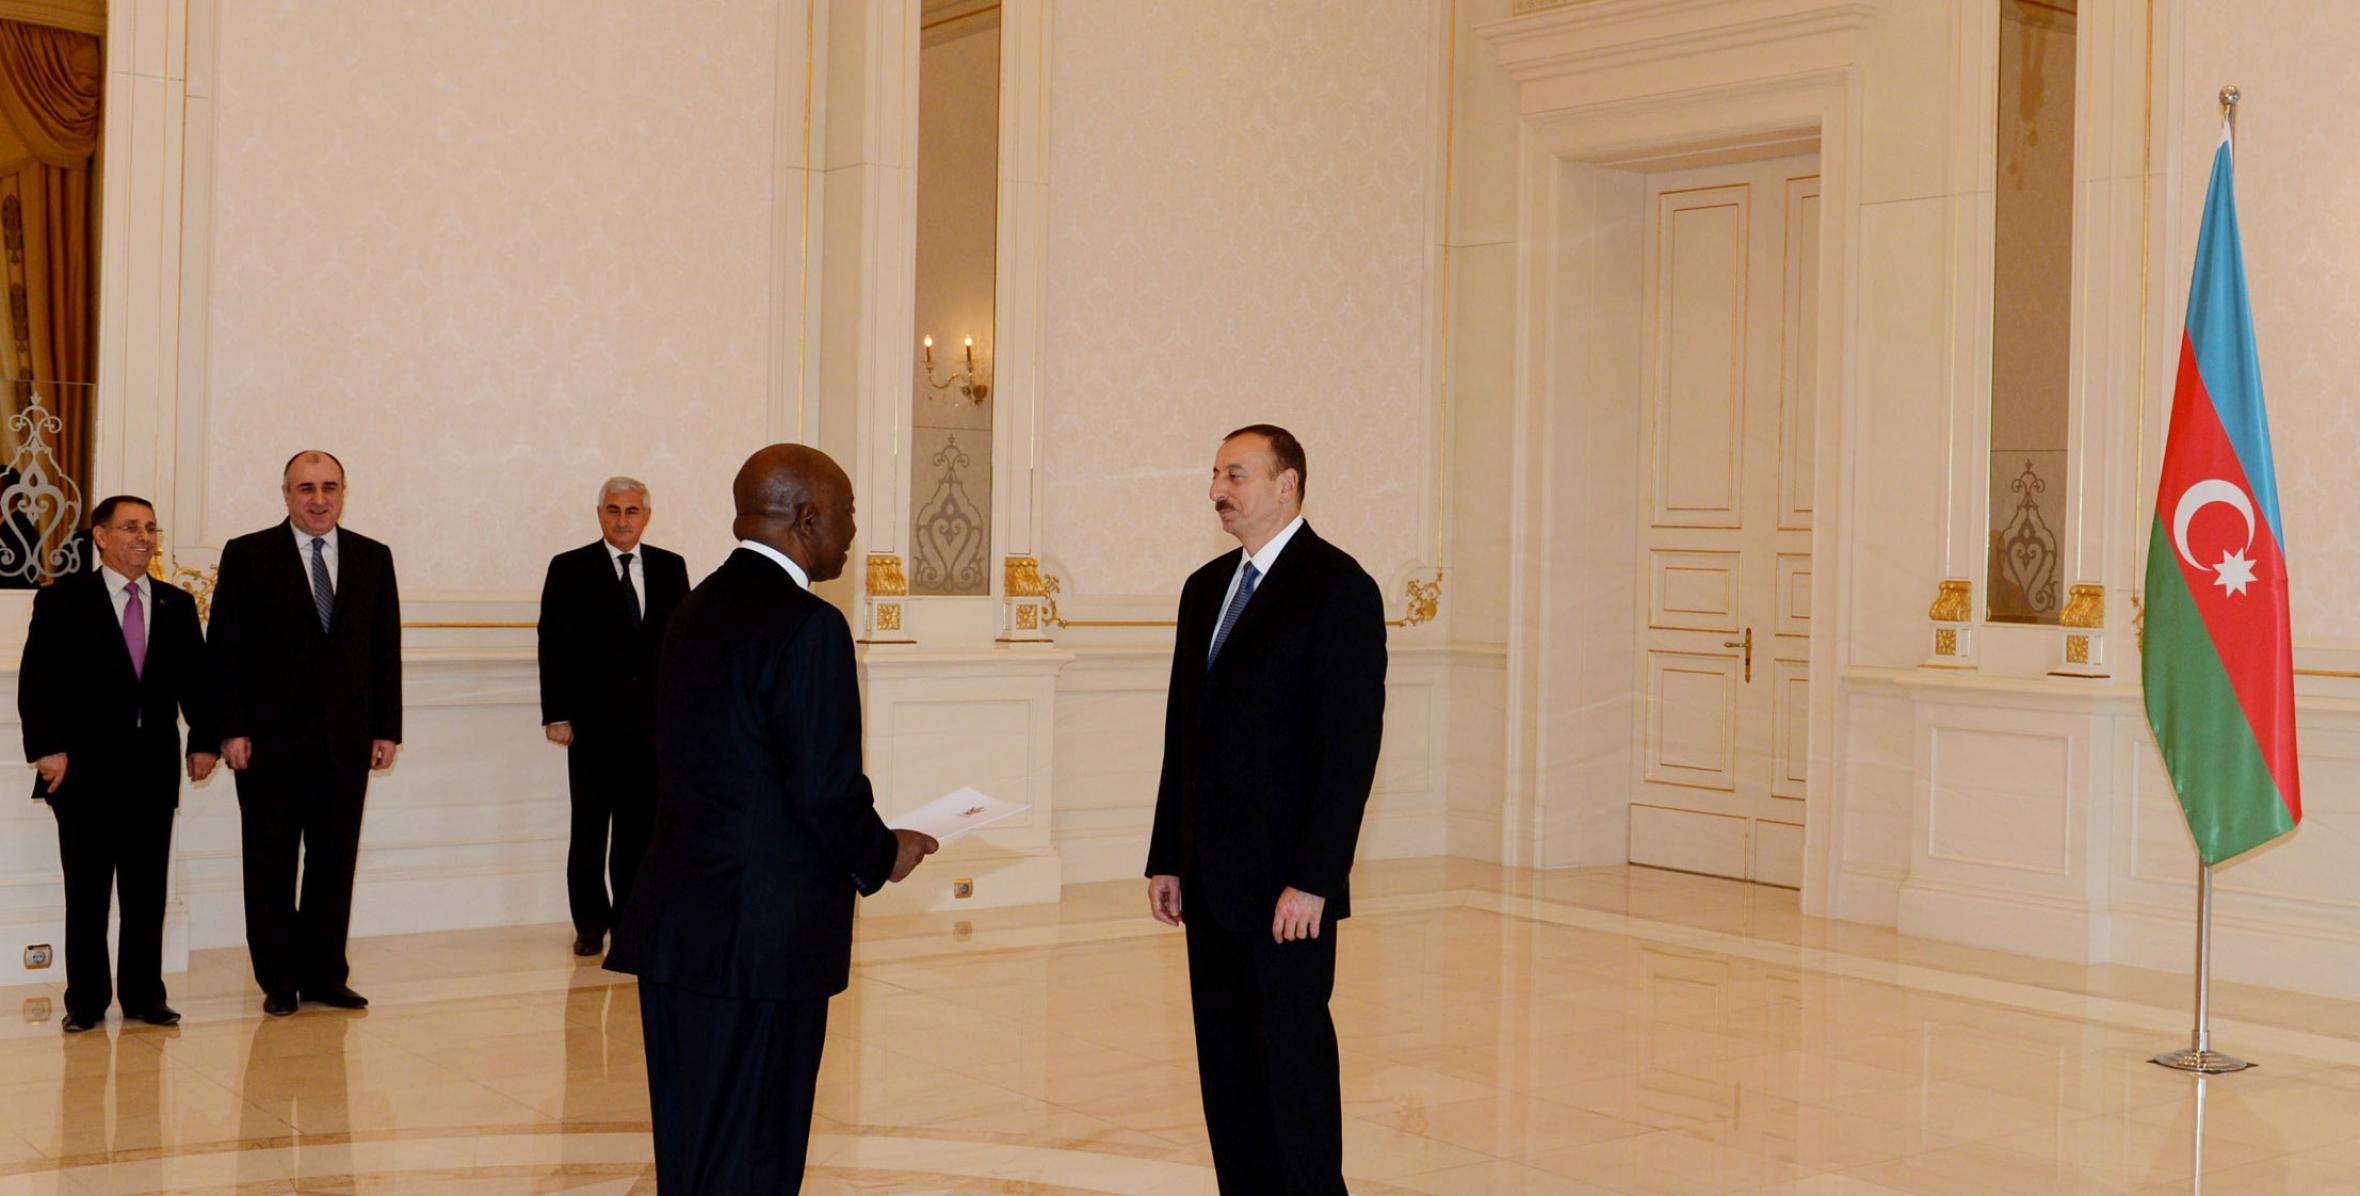 Ilham Aliyev accepted the credentials from the newly-appointed Ambassador of Zimbabwe to Azerbaijan